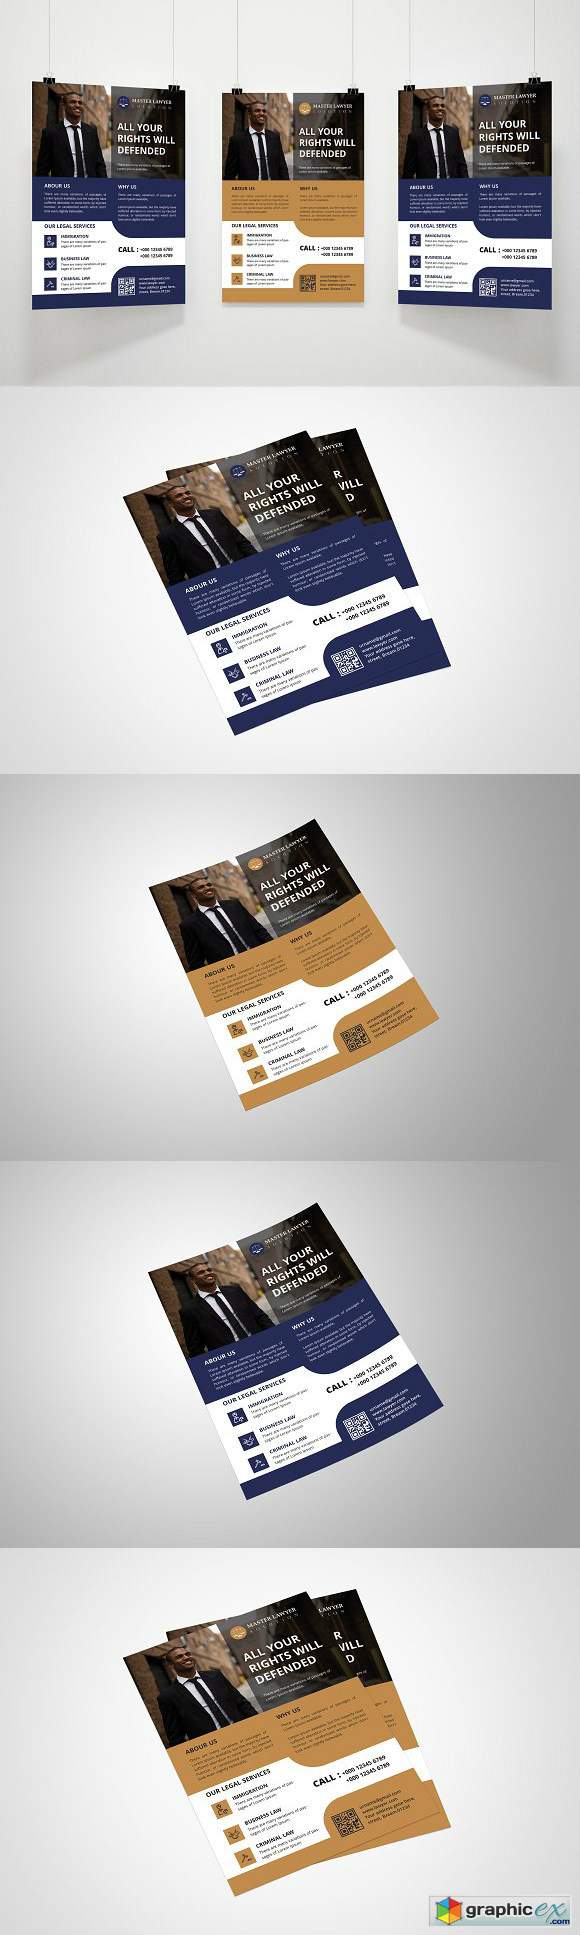 Lawyer Firm Flyer